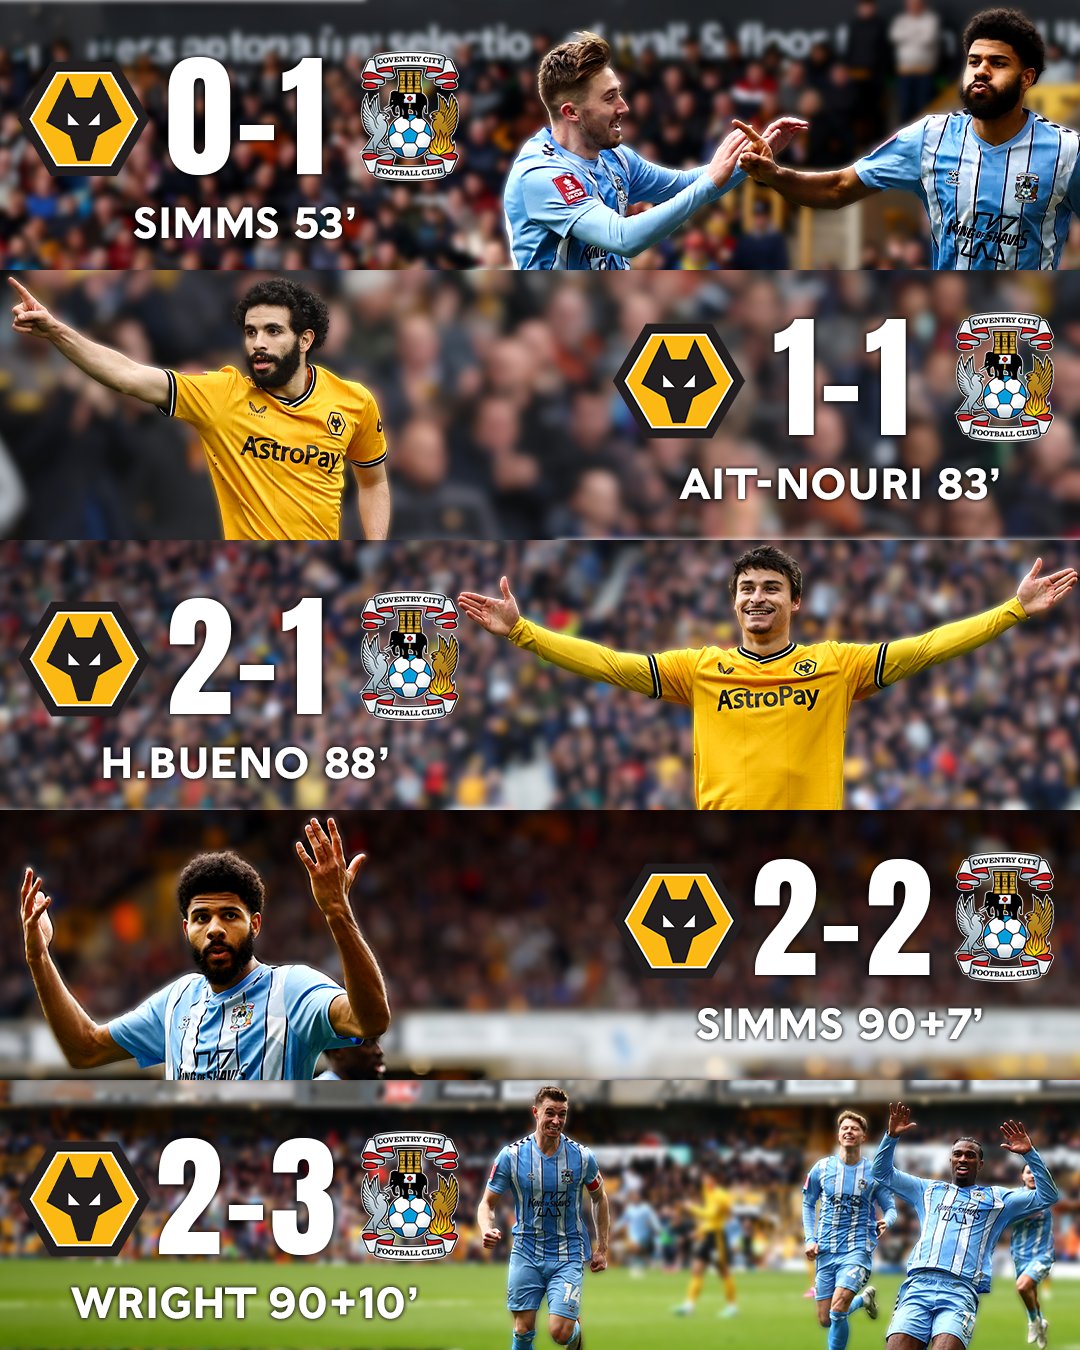 Wolves 0-1 Coventry- Simms 53' 
Wolves 1-1 Coventry- Ait-Nouri 83' 
Wolves 2-1 Coventry- Hugo Bueno 88' 
Wolves 2-2 Coventry- Simms 90+7' 
Wolves 2-3 Coventry- Wright 90+10'